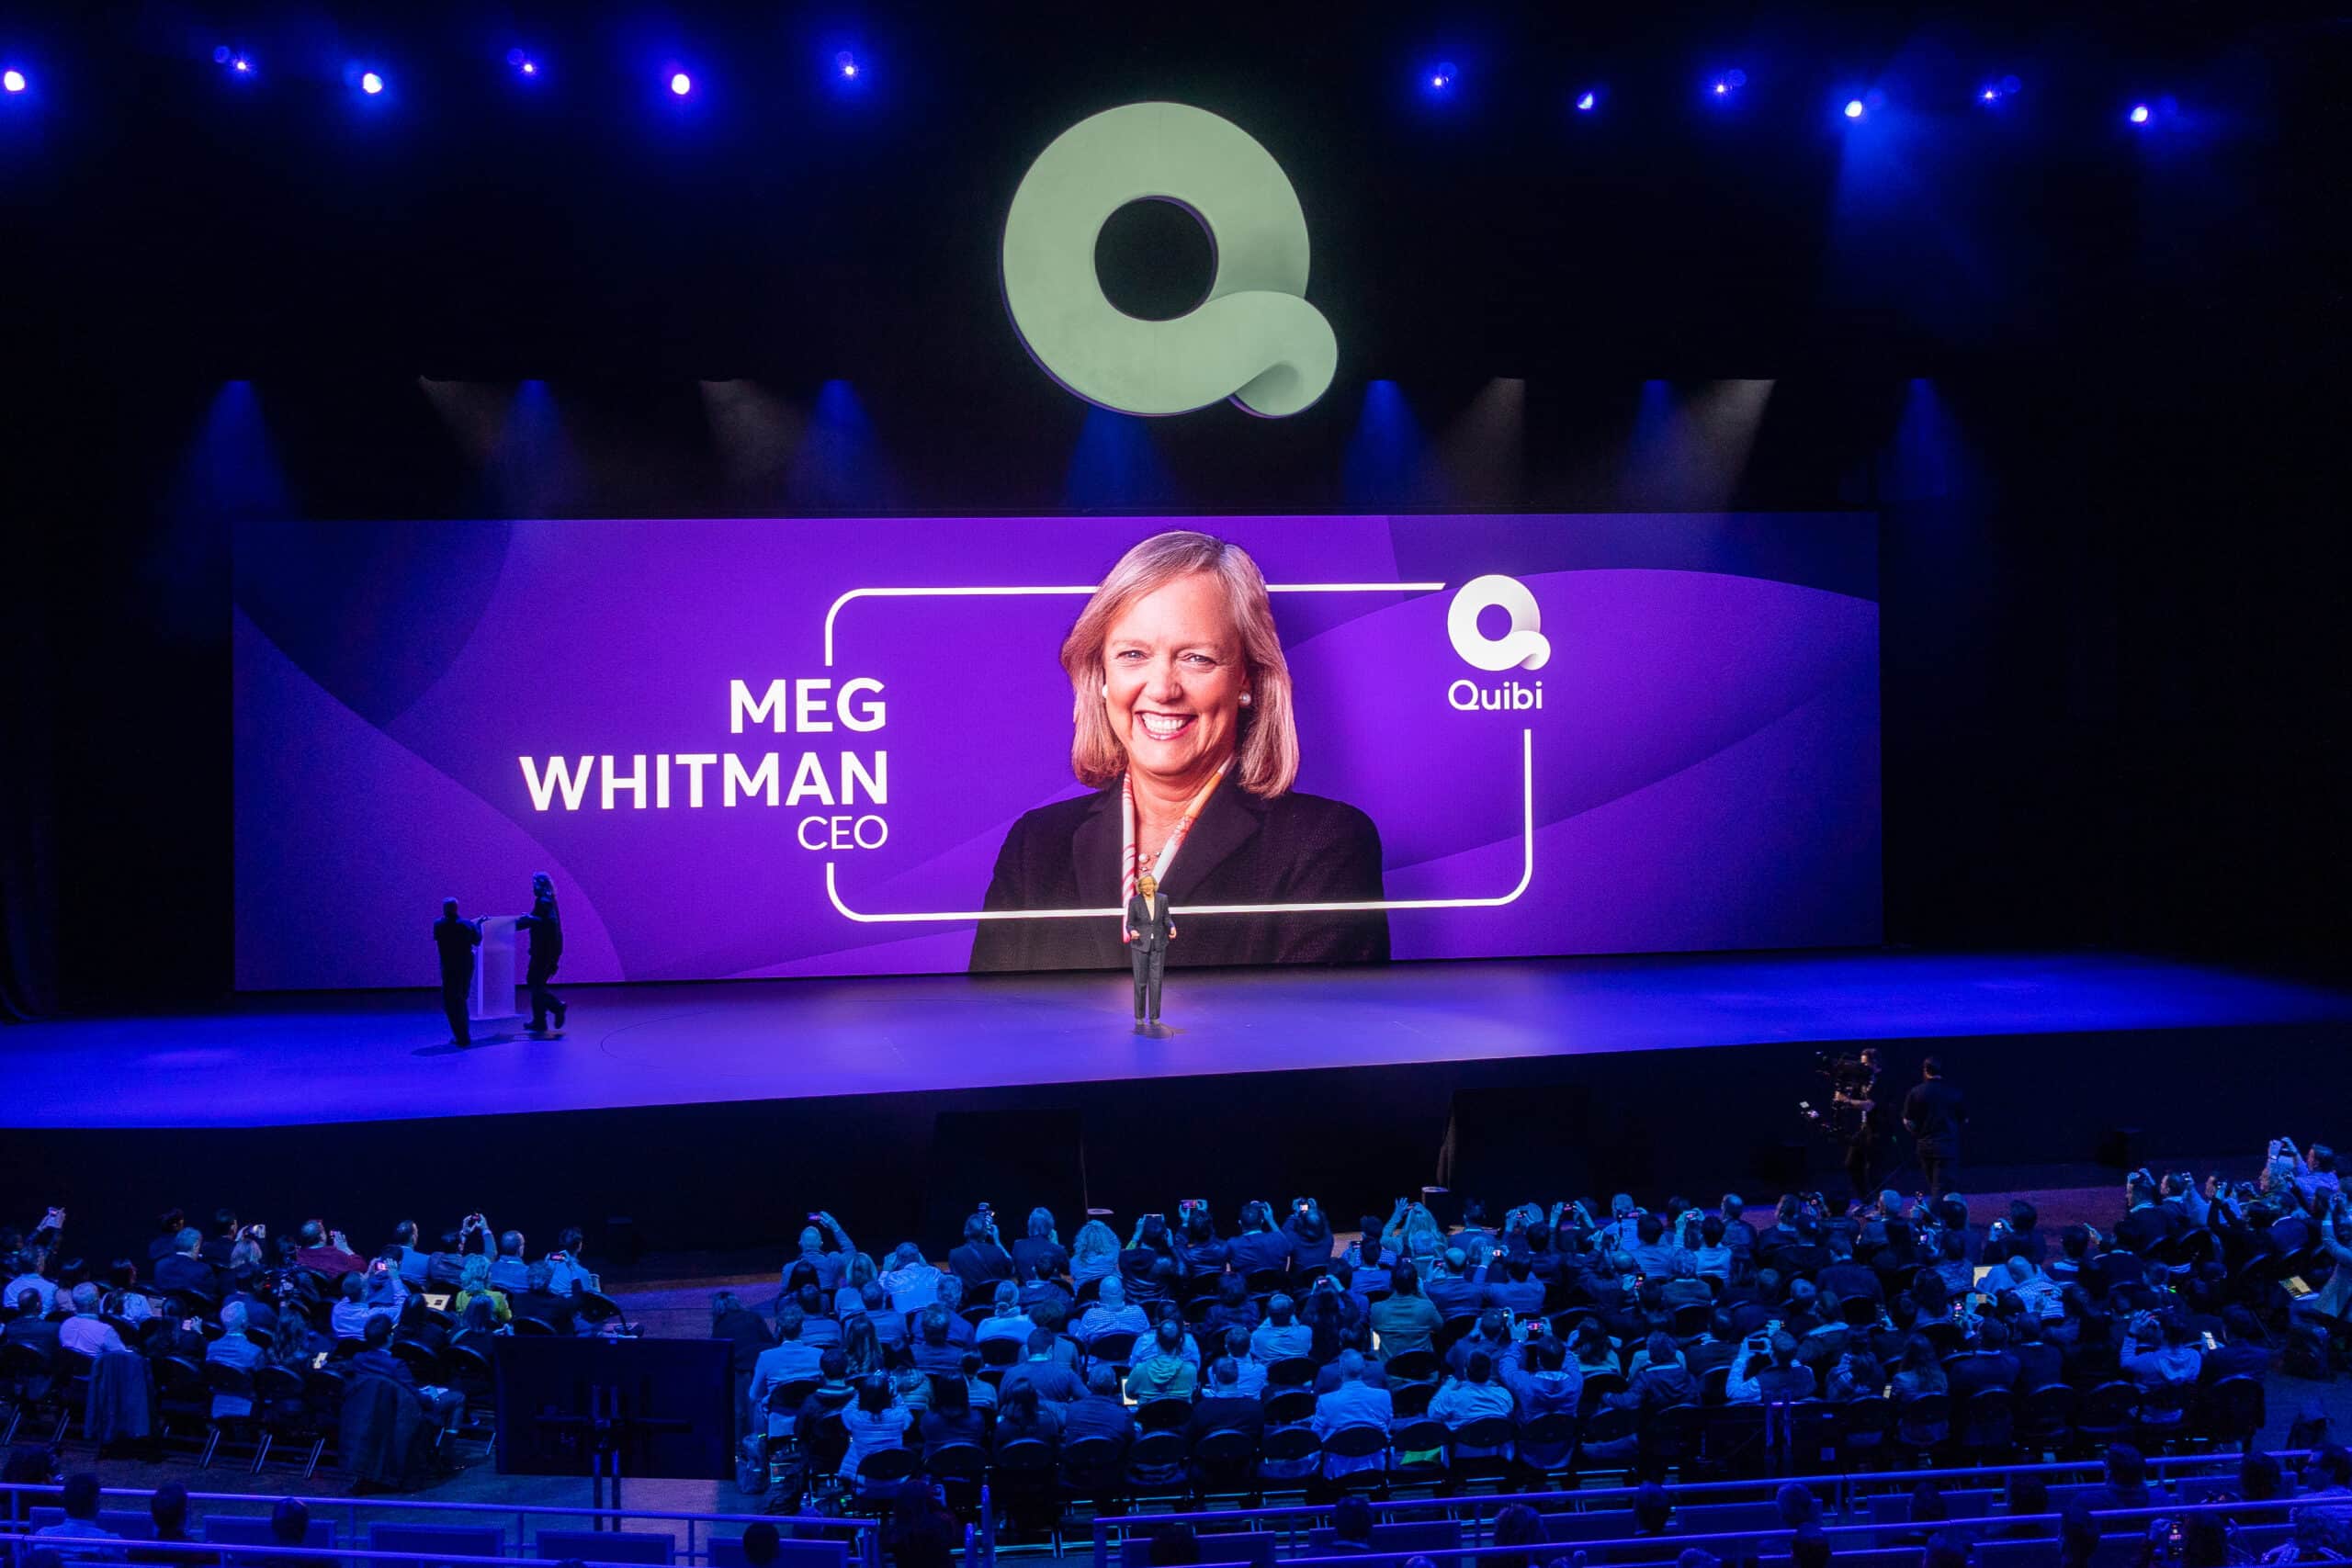 Big screen showing an image of Meg Whitman, who was pitching Quibi, at CES